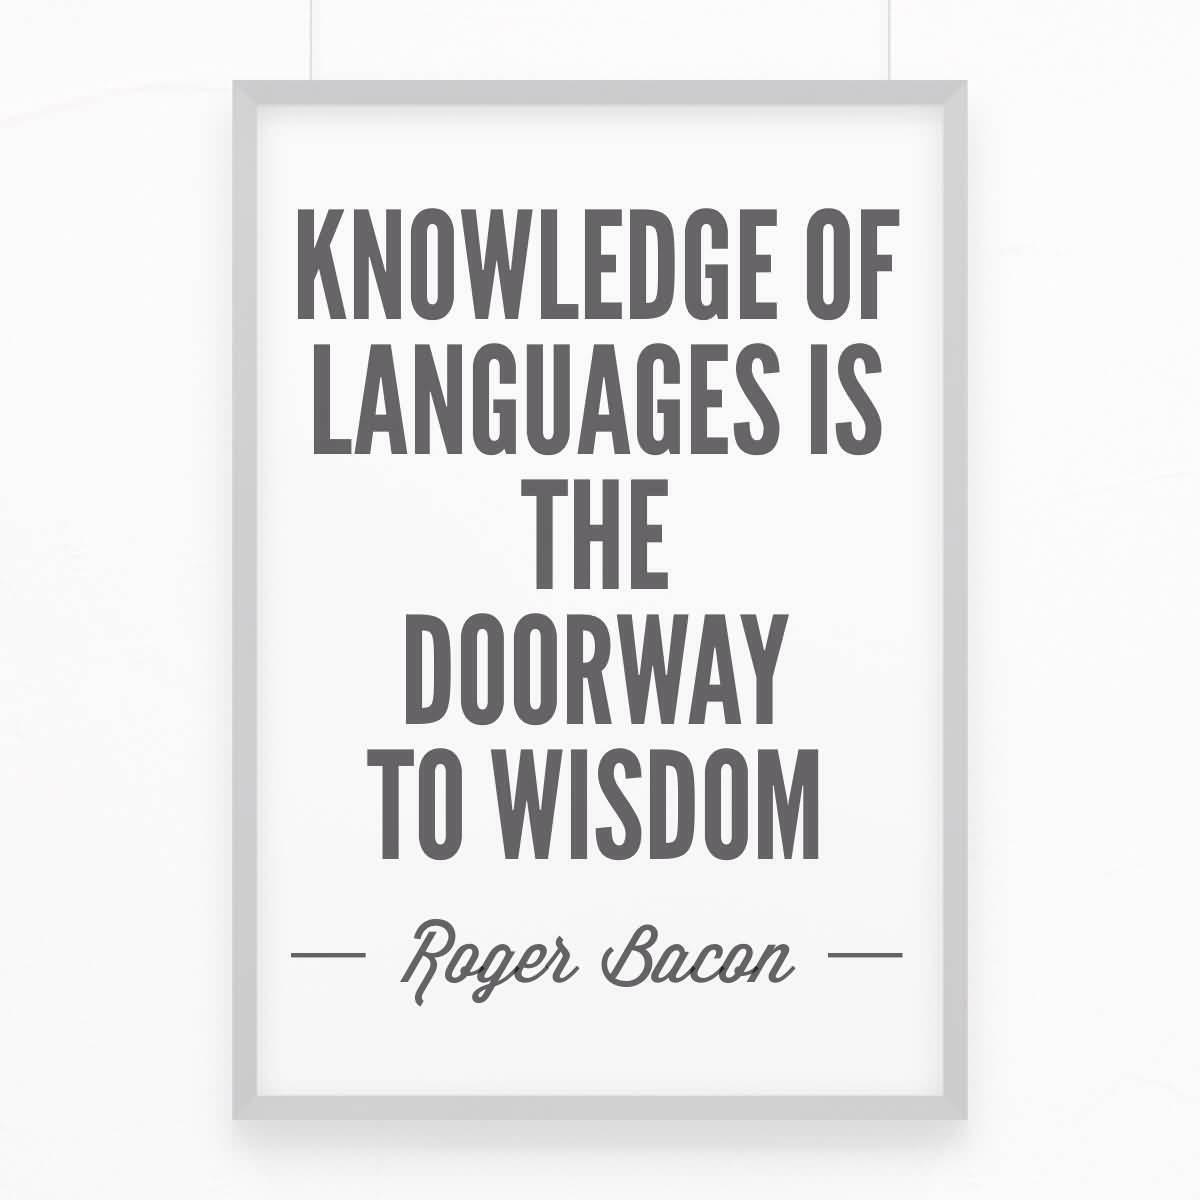 Knowledge of languages is the doorway to wisdom. Roger Bacon